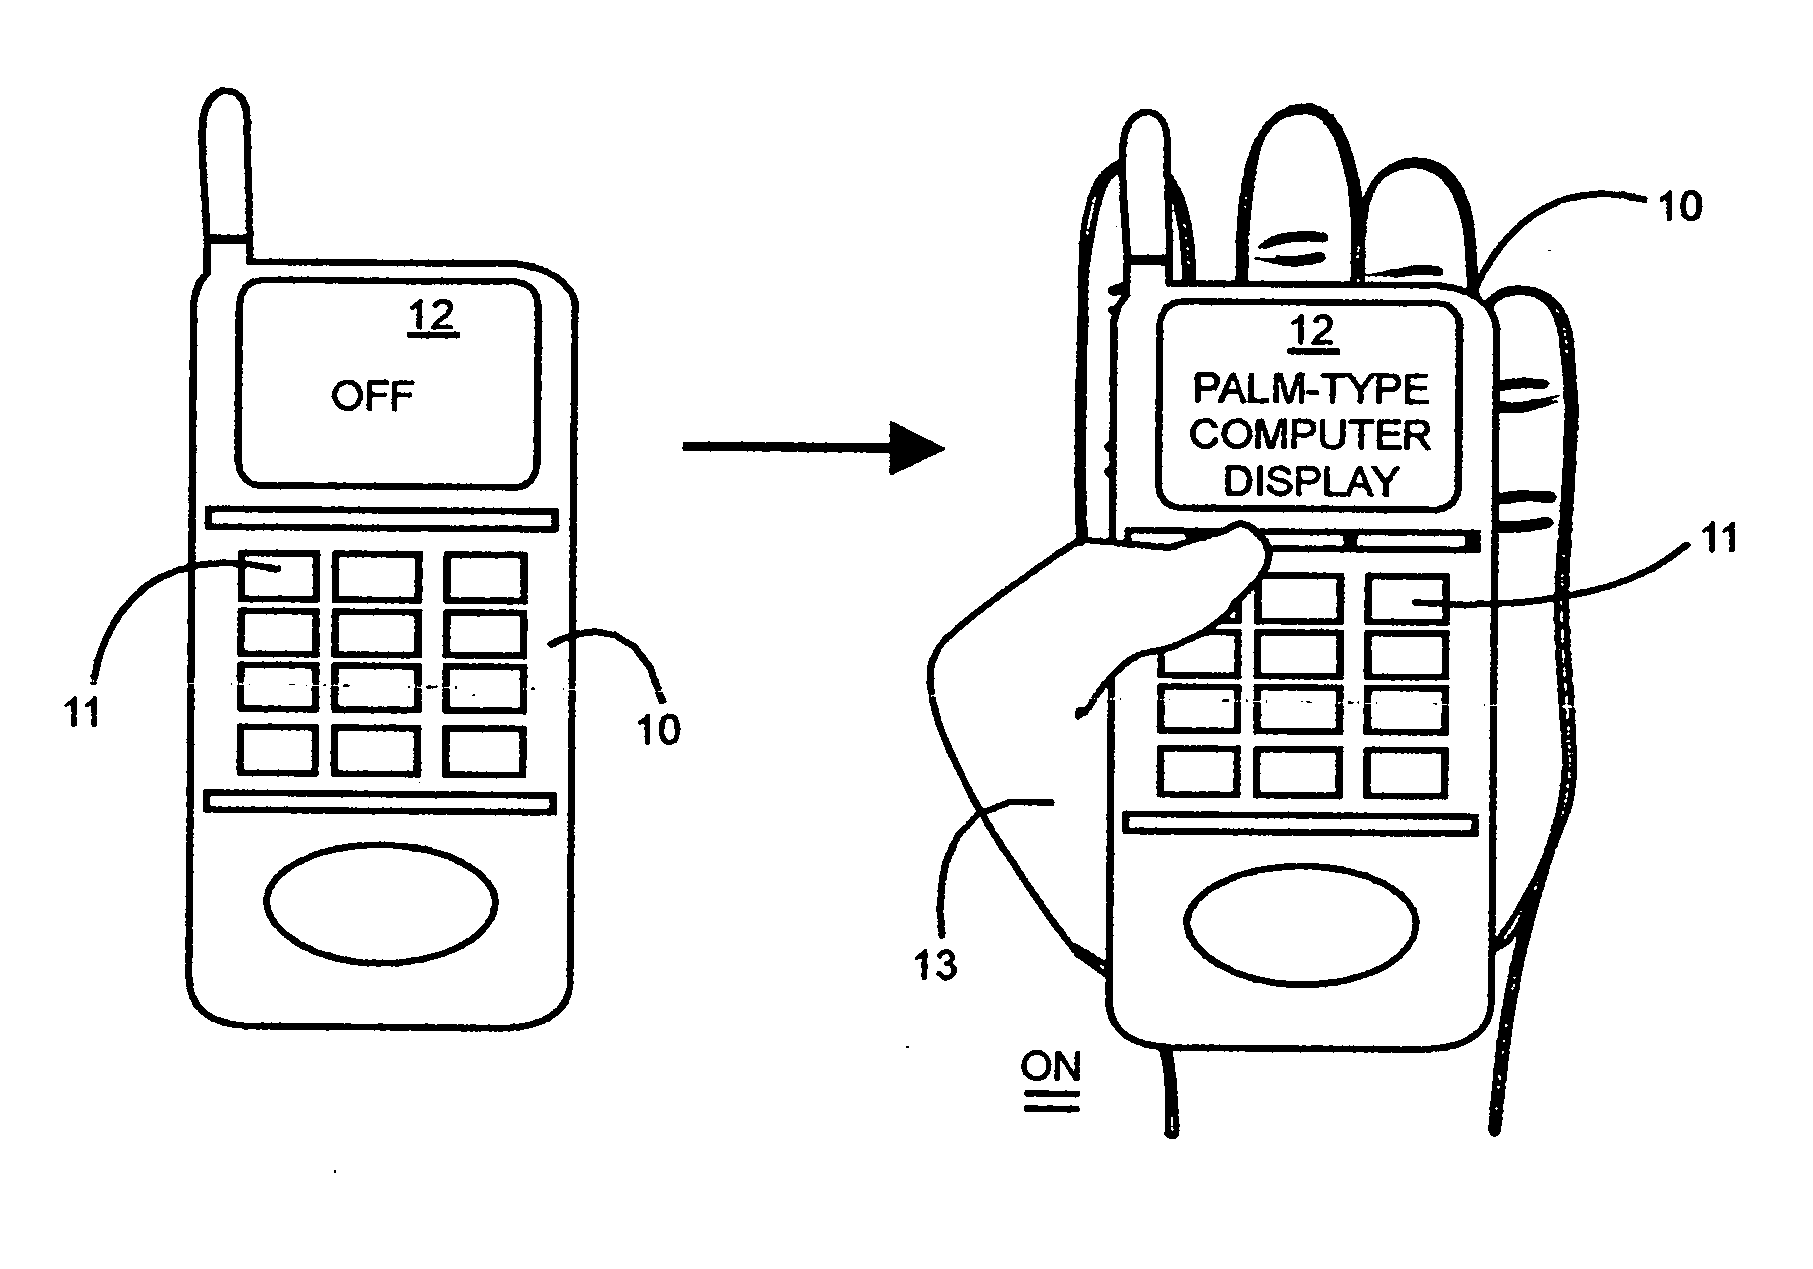 Preventing inadvertent striking of keys and like buttons in handheld palm-type devices when such devices are not in handheld usage